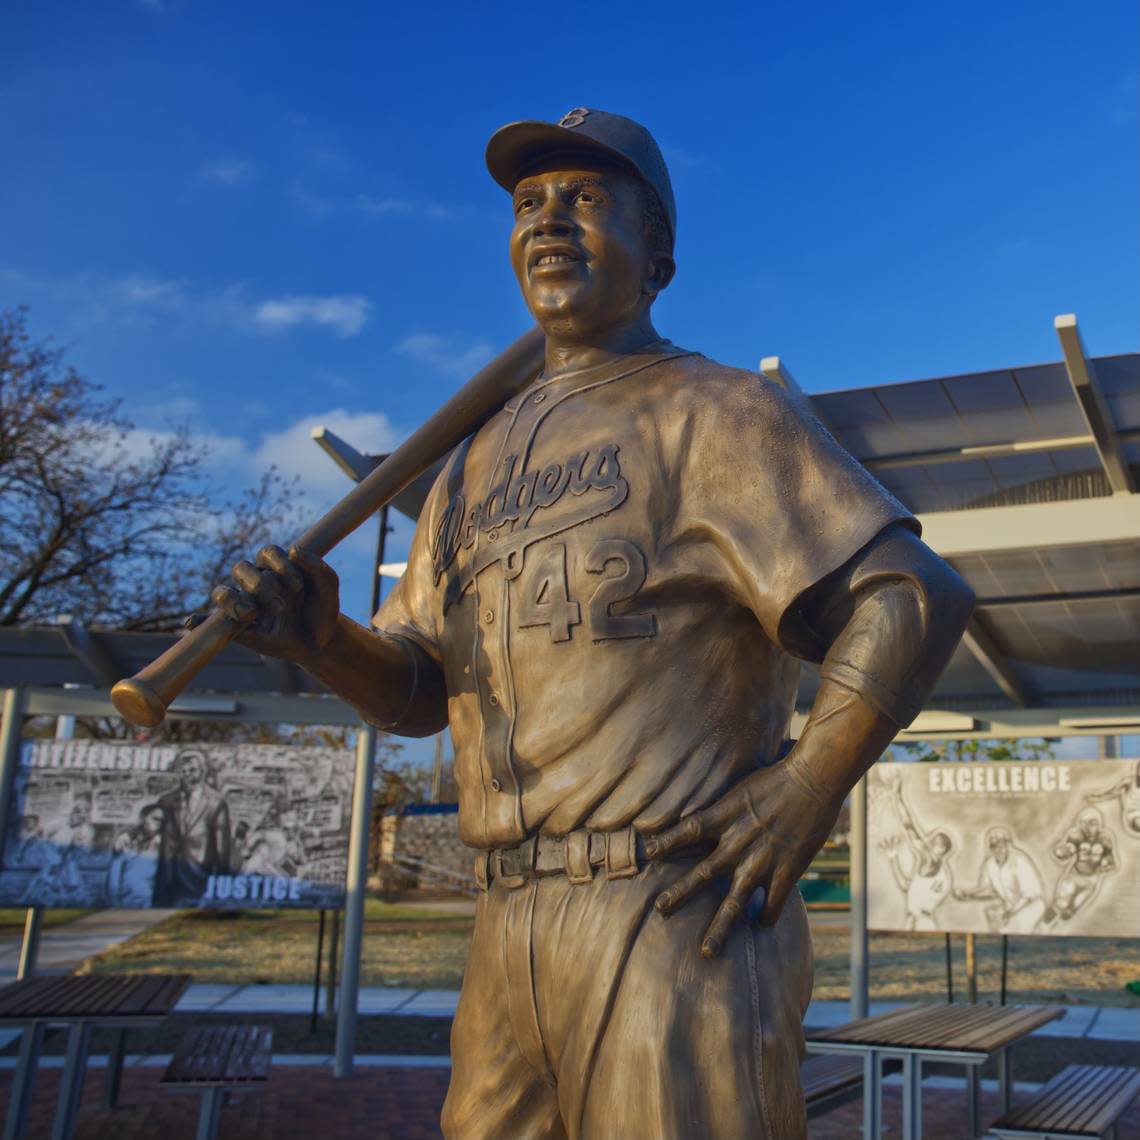 Pictured is the Jackie Robinson statue that the league unveiled in Spring 2021 at McAdams Park.